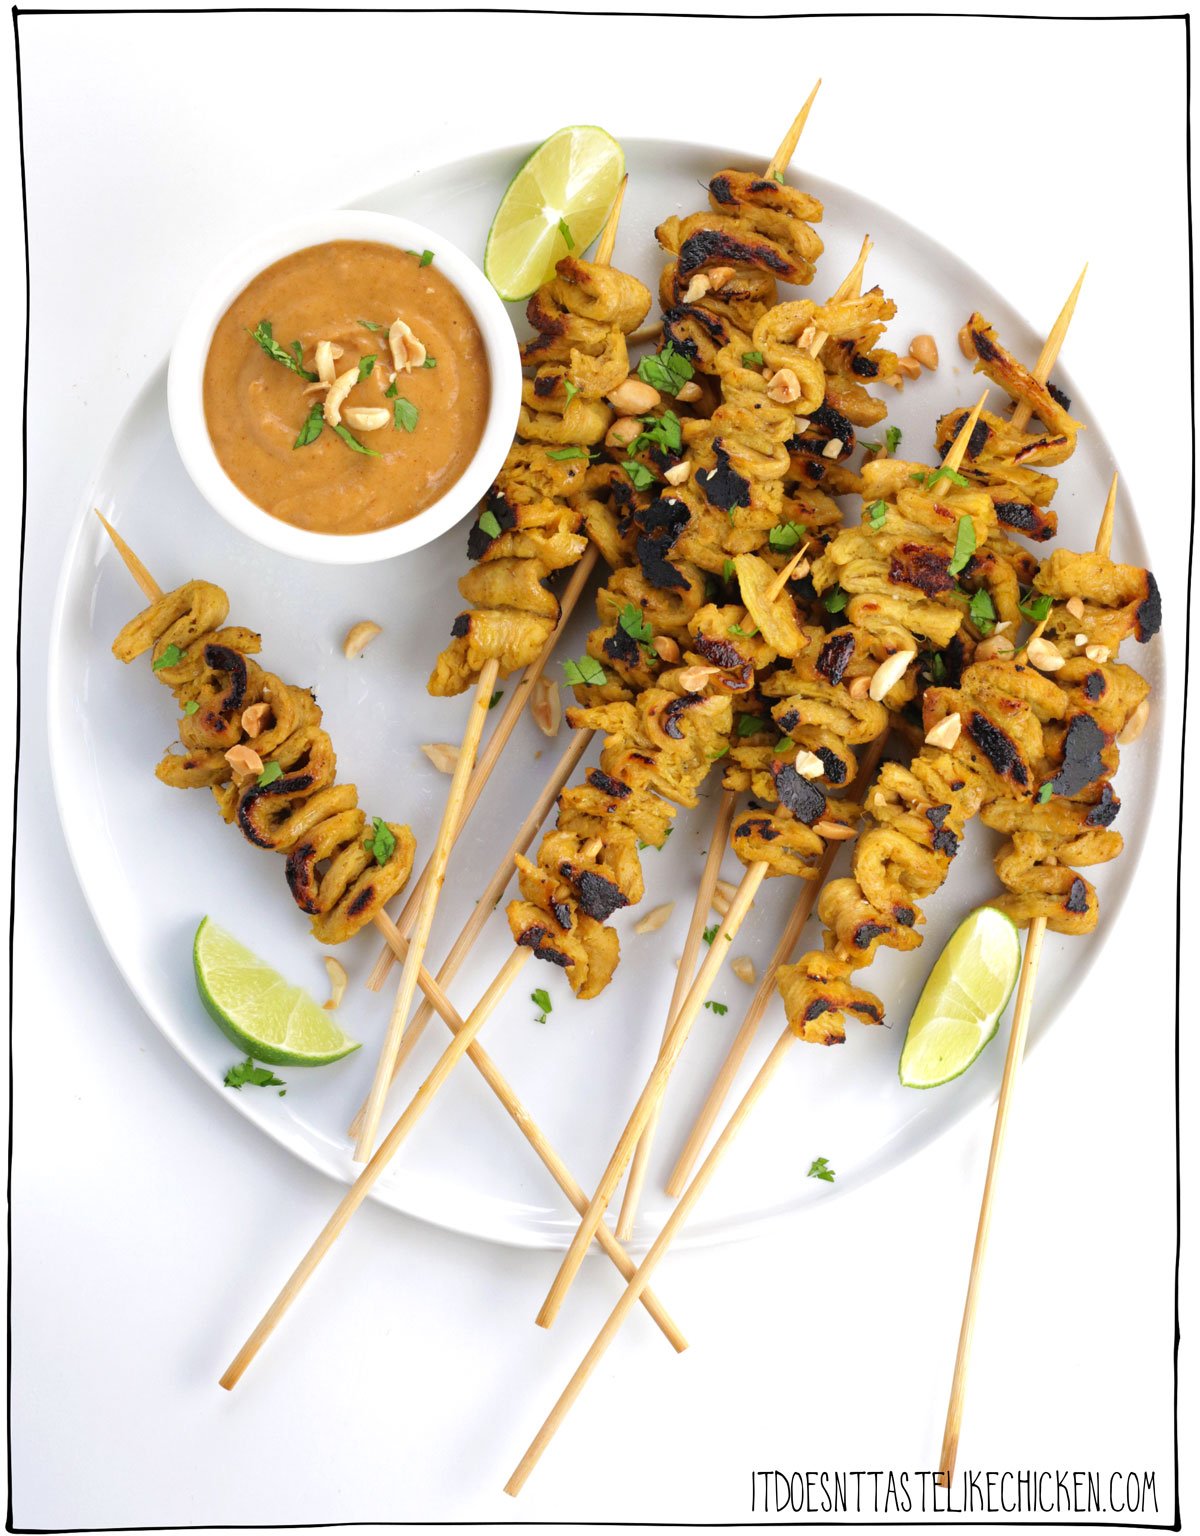 These vegan satay skewers are marinated in creamy coconut curry sauce, then grilled to perfection and served with spicy peanut sauce, and garnished with limes and chopped peanuts! Hello, deliciousness! These skewers are a super impressive appetizer or can be enjoyed as a main served with rice and veggies. #itdoesntastelikechicken #veganrecipes #soycurls